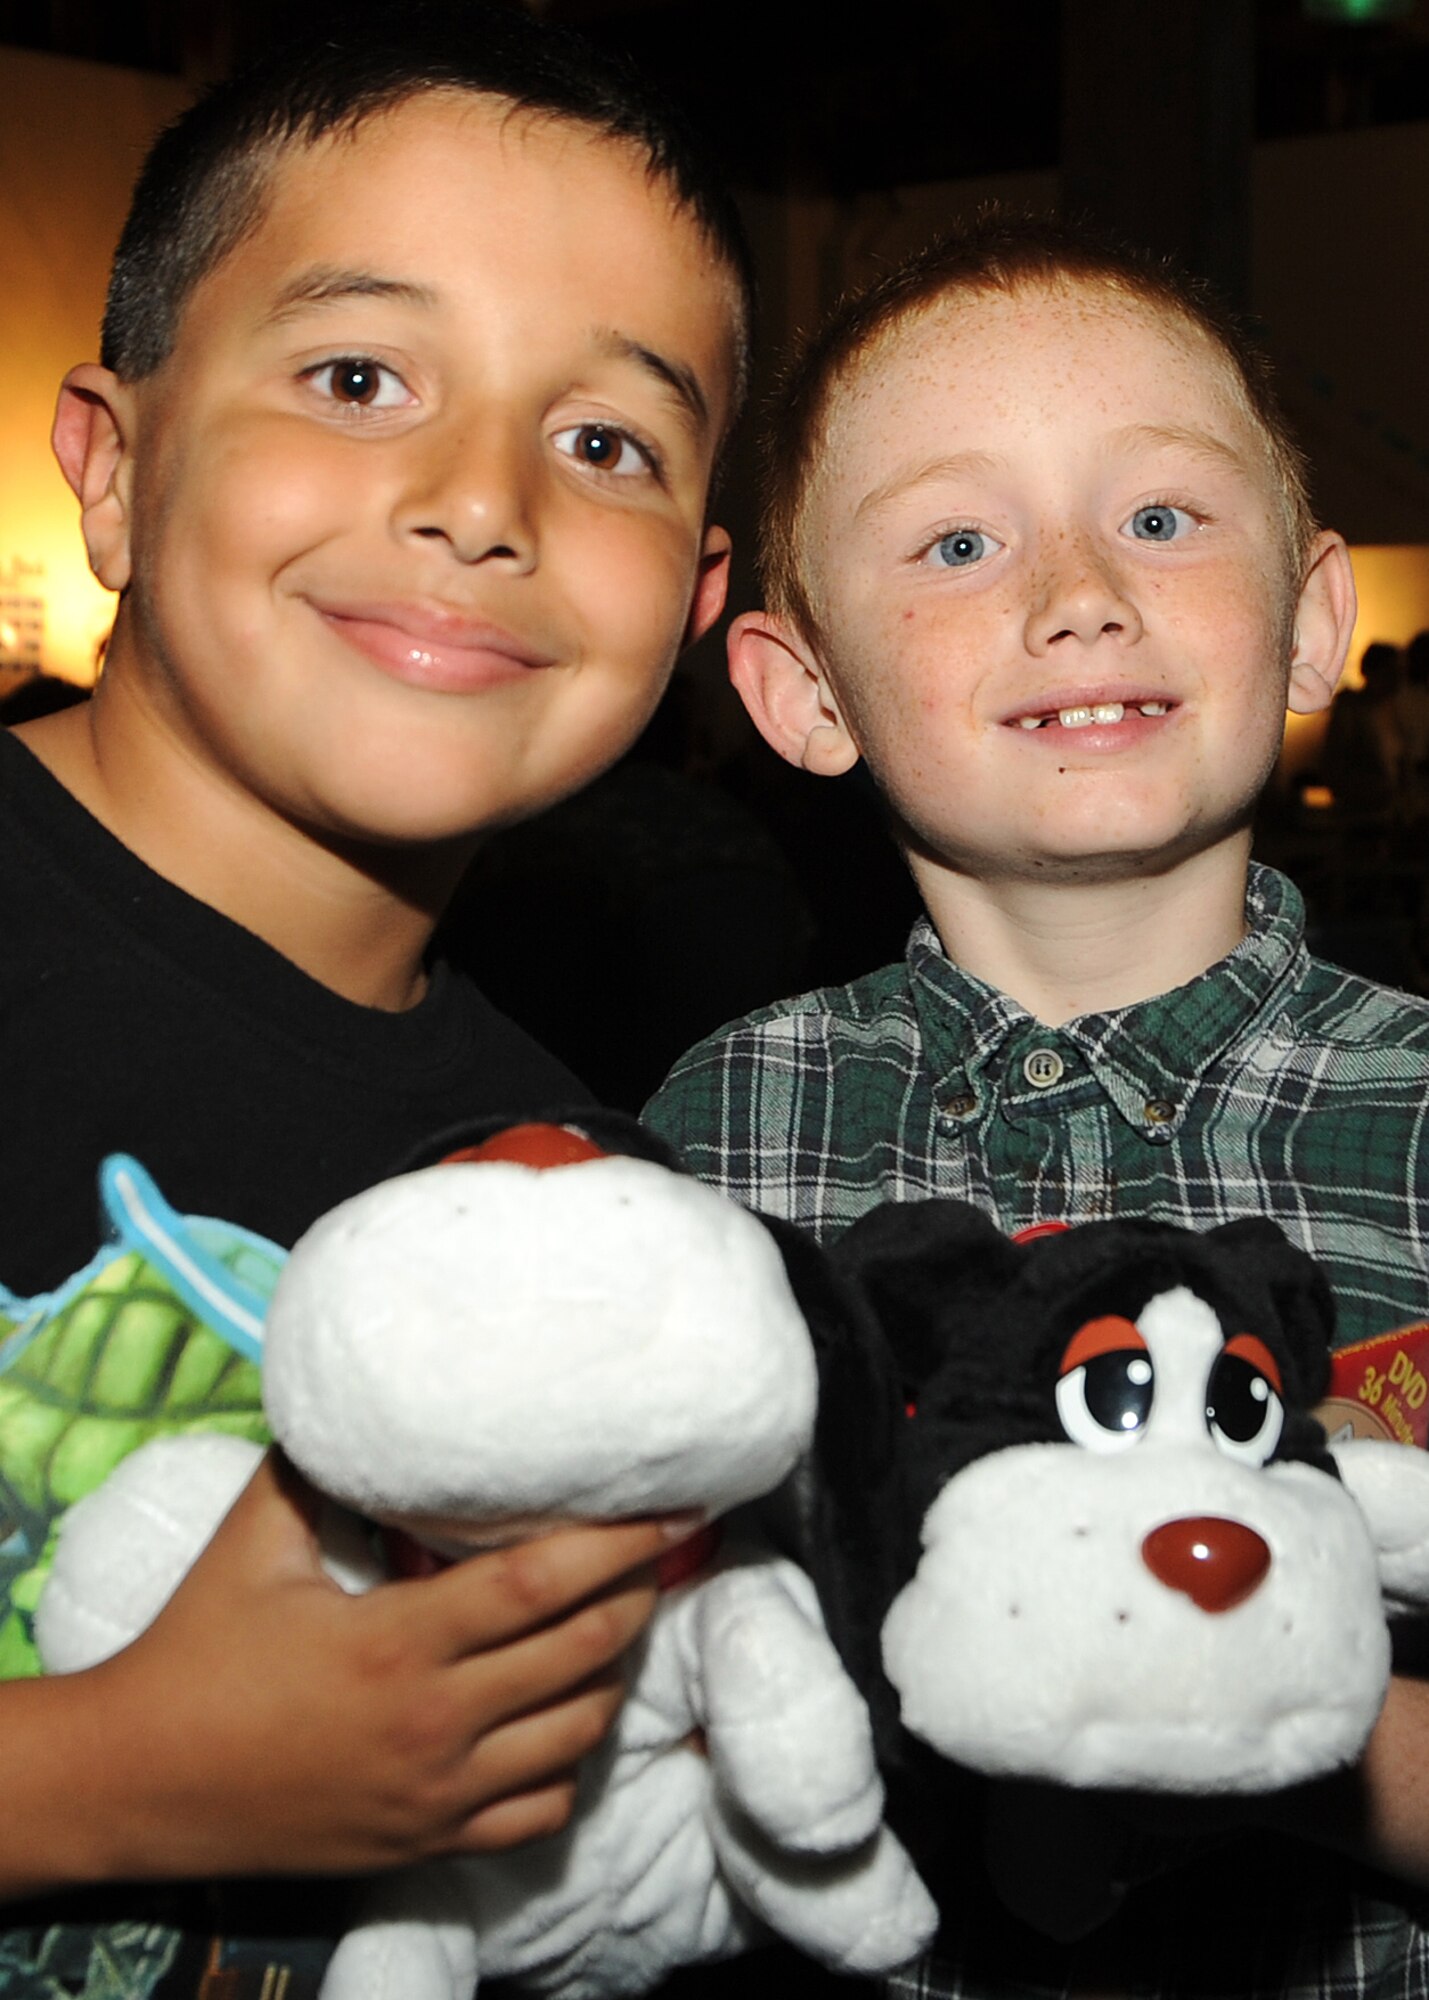 Ricardo Dias (left) and Samuel Beam make friends with their newly adopted Pound Puppies during the 8th annual Harvest Fest held at the Fort McArthur Youth Center, San Pedro, Calif., Nov. 19. Children and staff from the Youth Programs prepared food for the celebration and the children demonstrated what they’ve learned through the YP classes. Each military child received a new Pound Puppy, which was shared by the Los Angeles Air Force Base Child Development Center from a donation they received. (Photo by Joe Juarez)